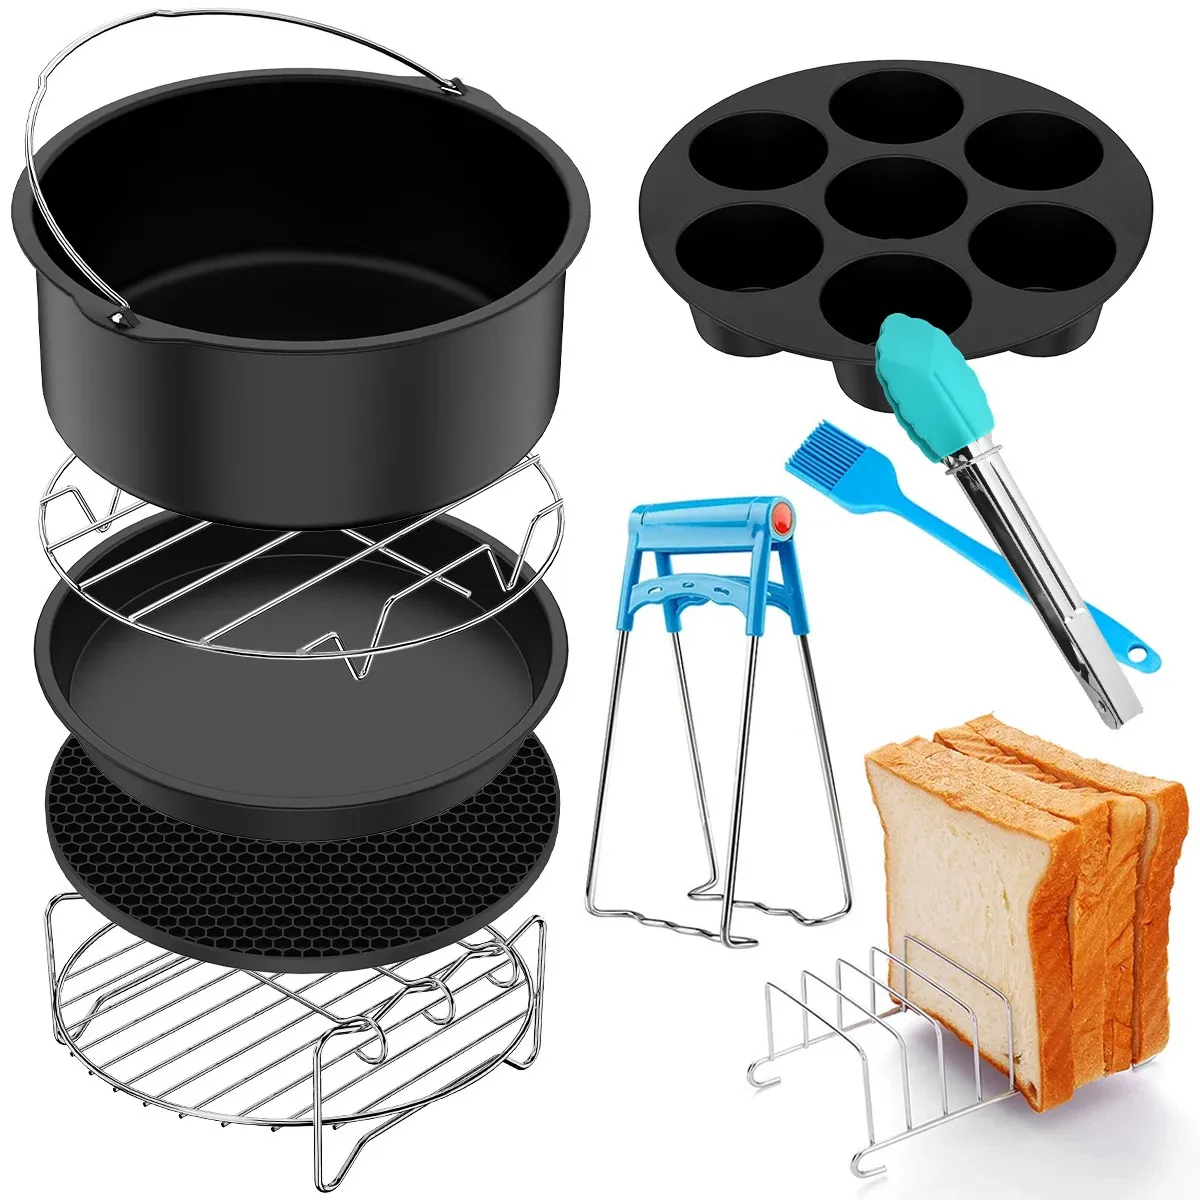 10Pcs 7 Inch Air Fryer Accessories Cake Basket Pizza Pan Stainless Steel Skewer Rack Oil Brush Suitable for 37 QT 240325